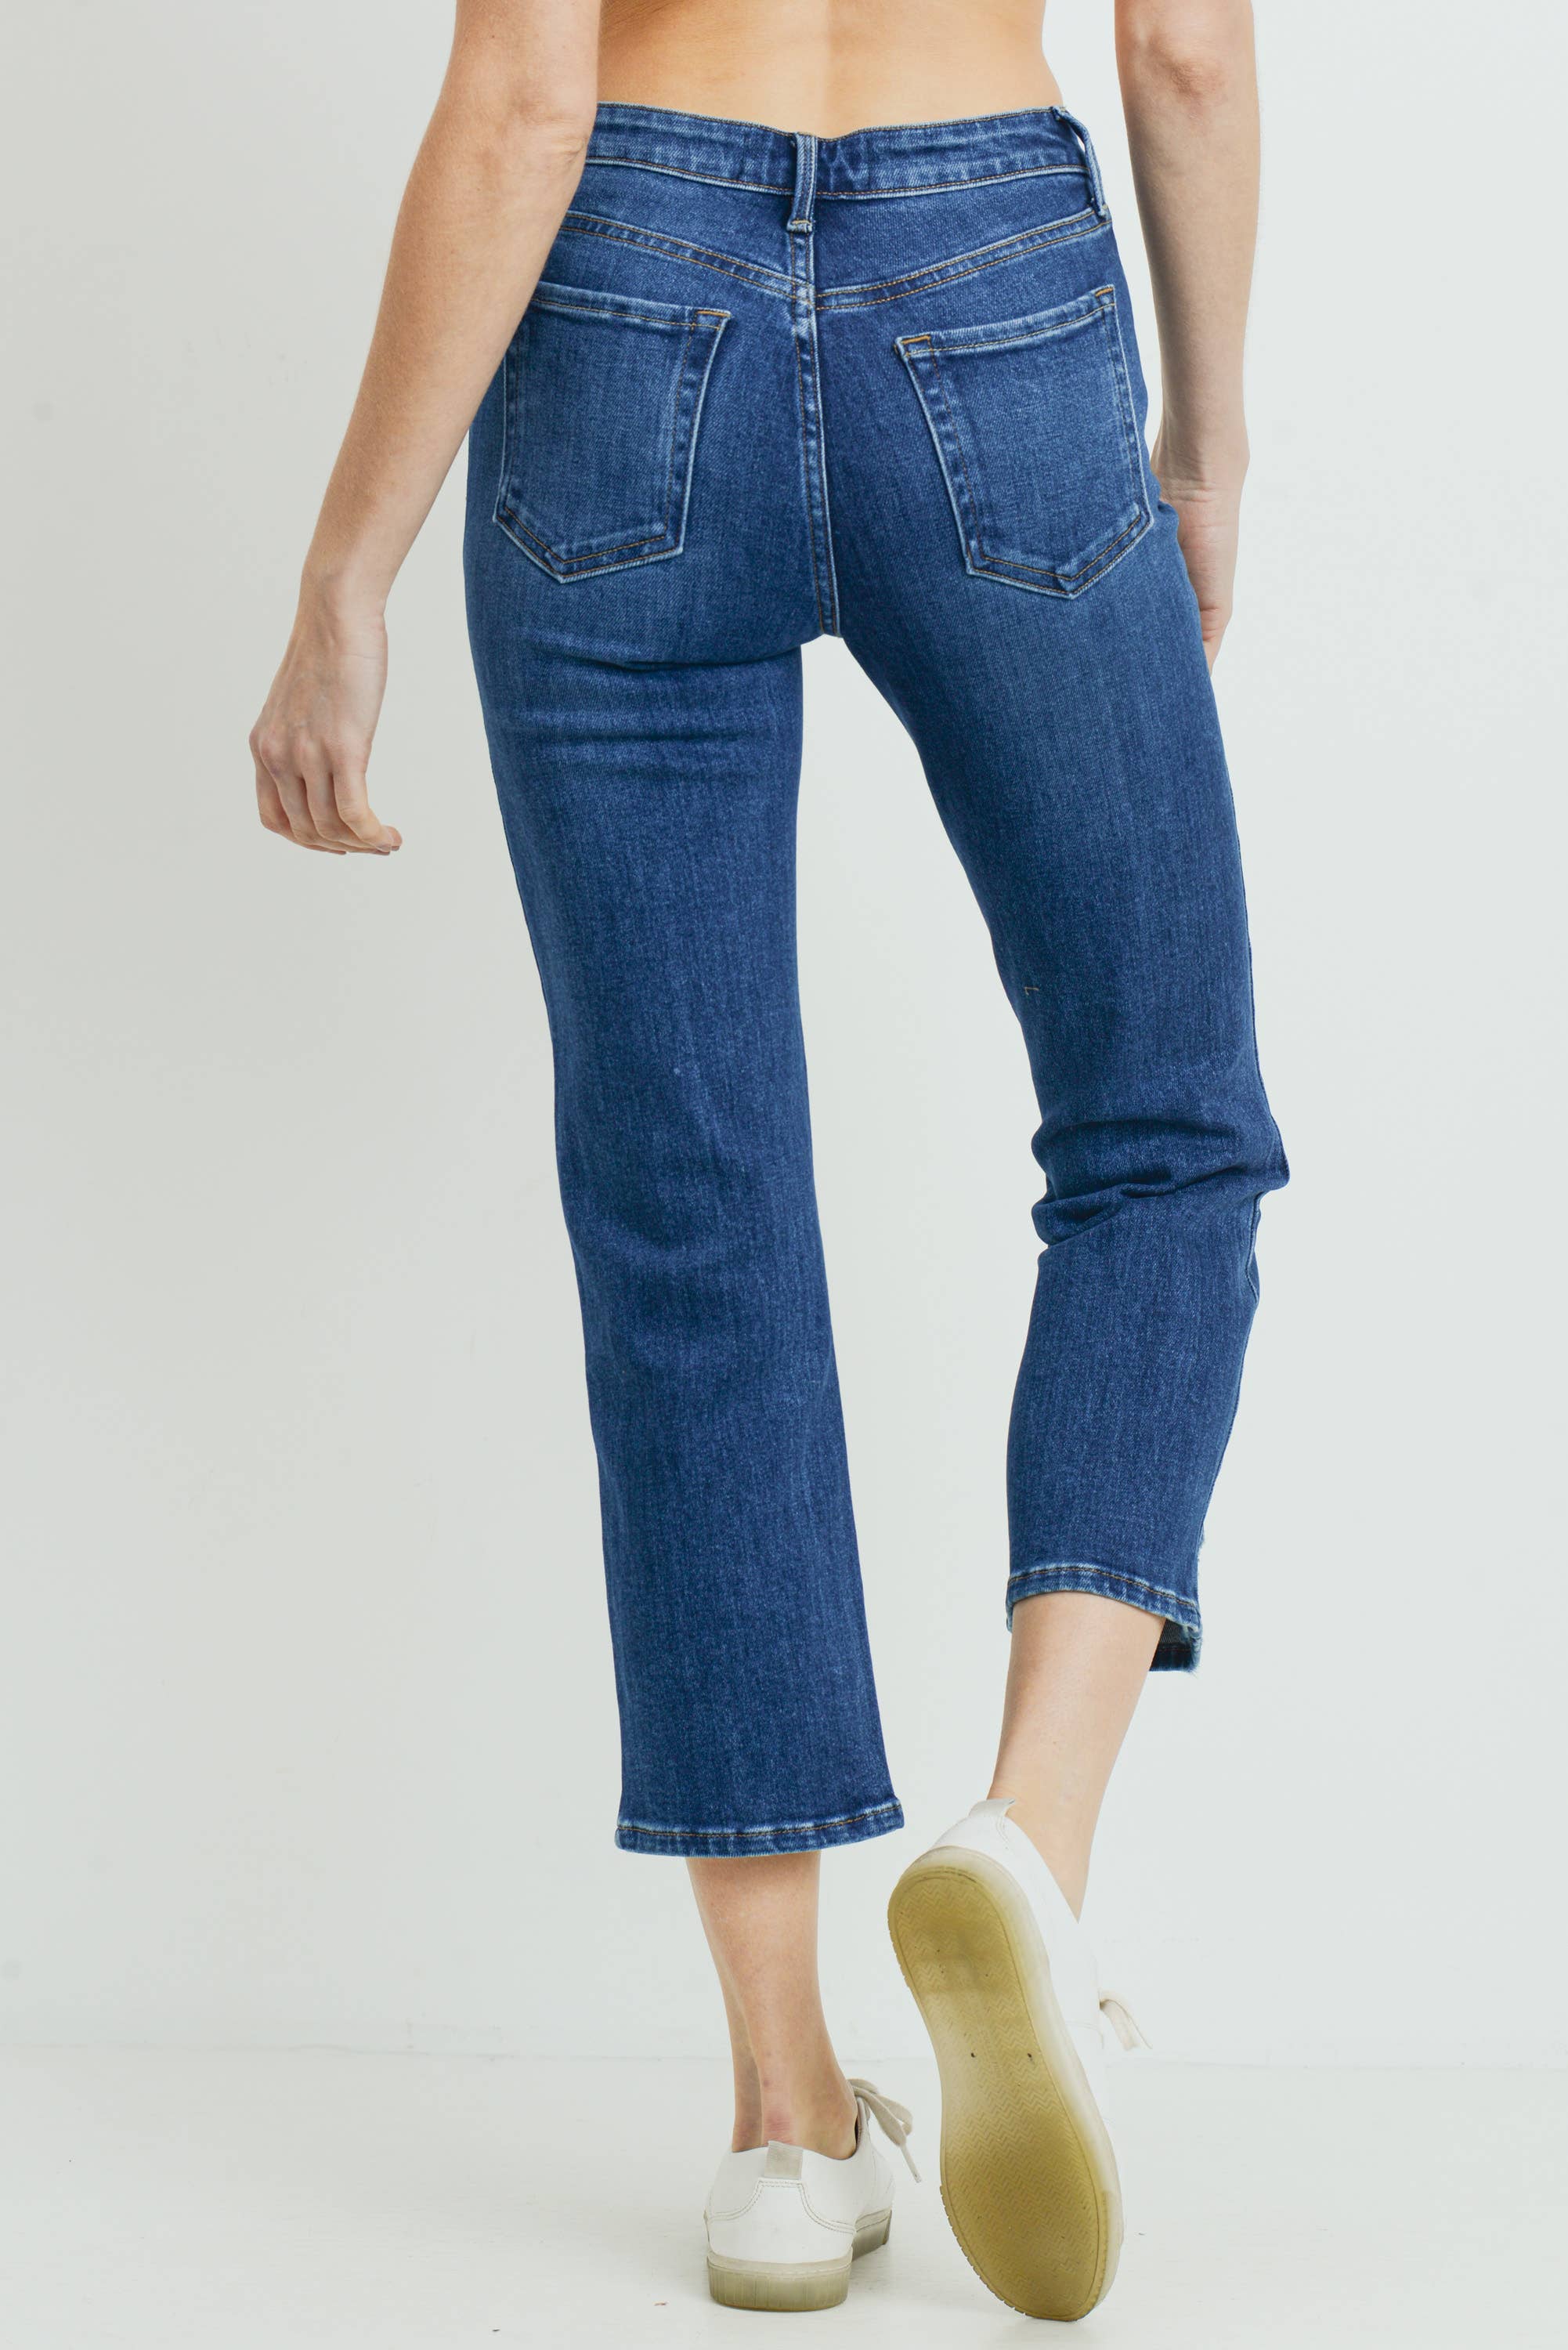 The Official Weekend Jeans by Just Black Denim